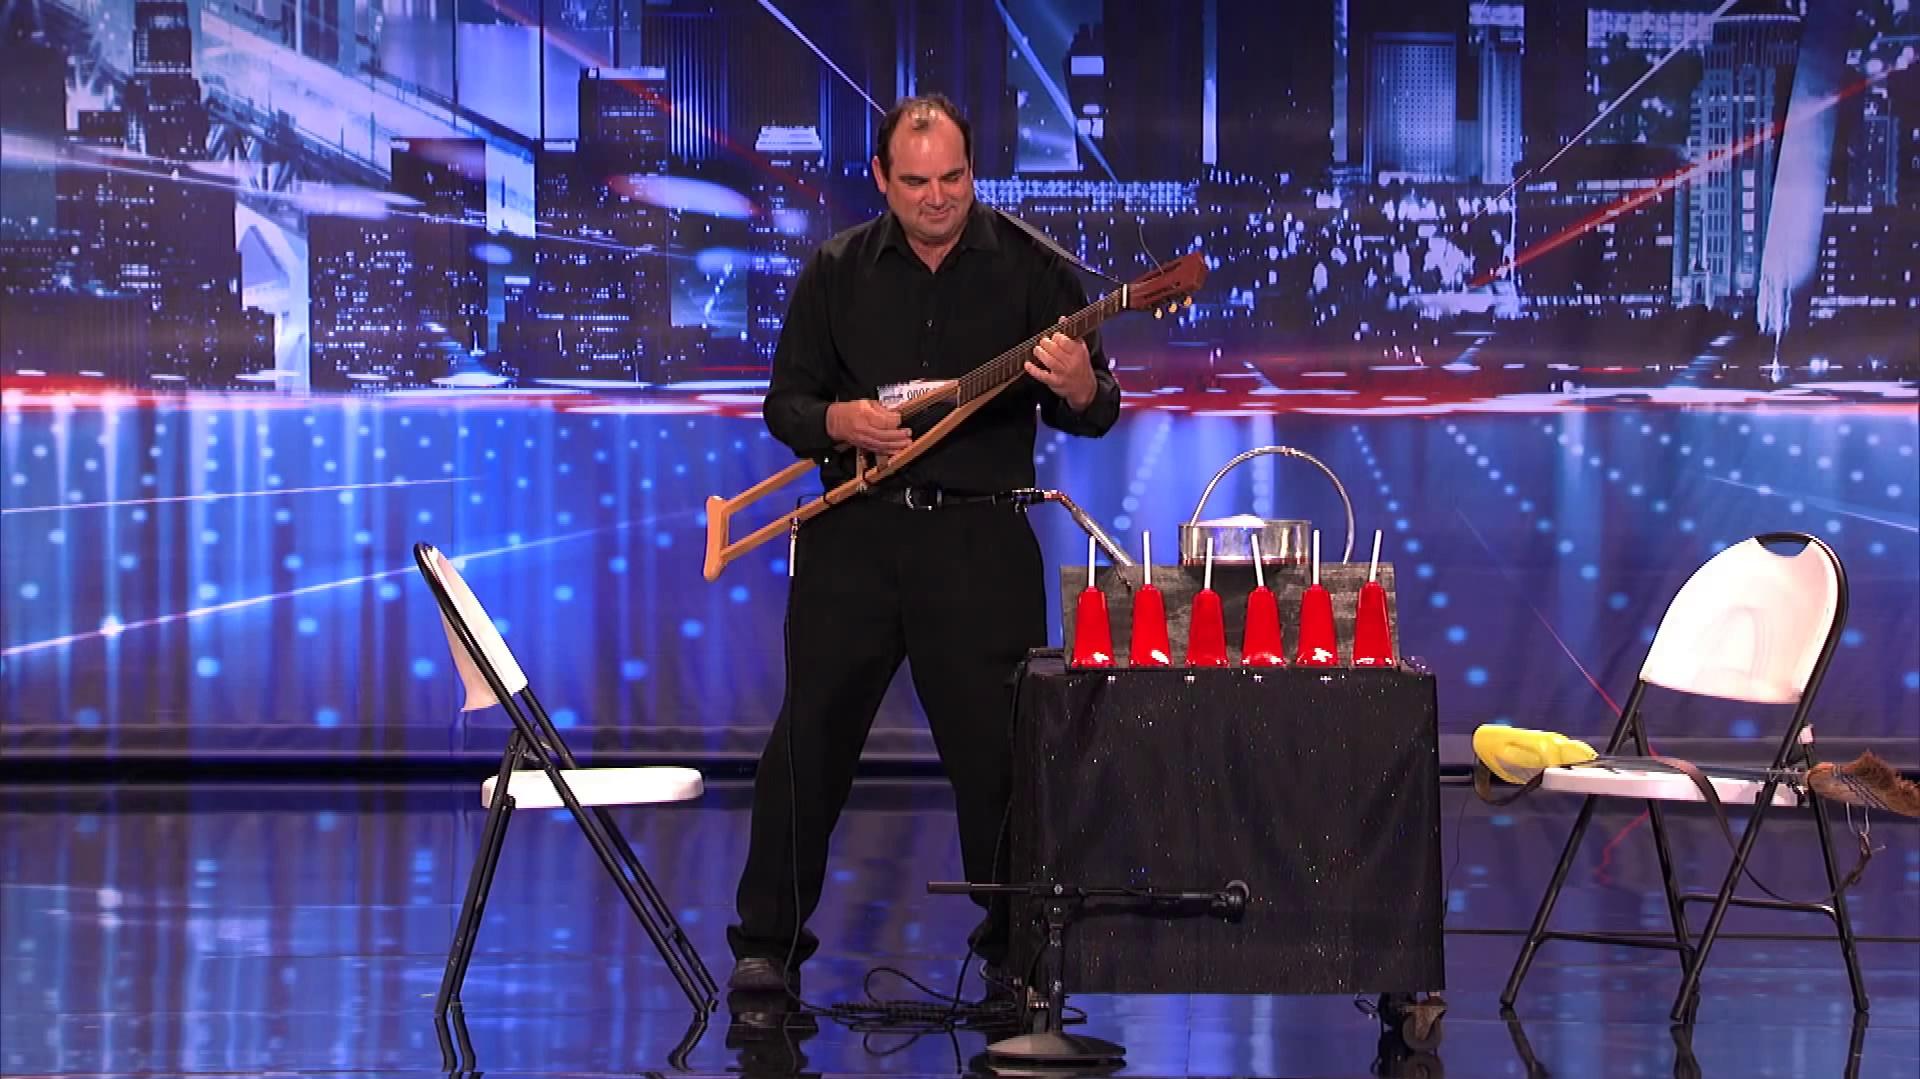 America's Got Talent 2013 - Season 8 - 105 - Abel - Musician Plays Instruments Made Out of Brooms and Crutches